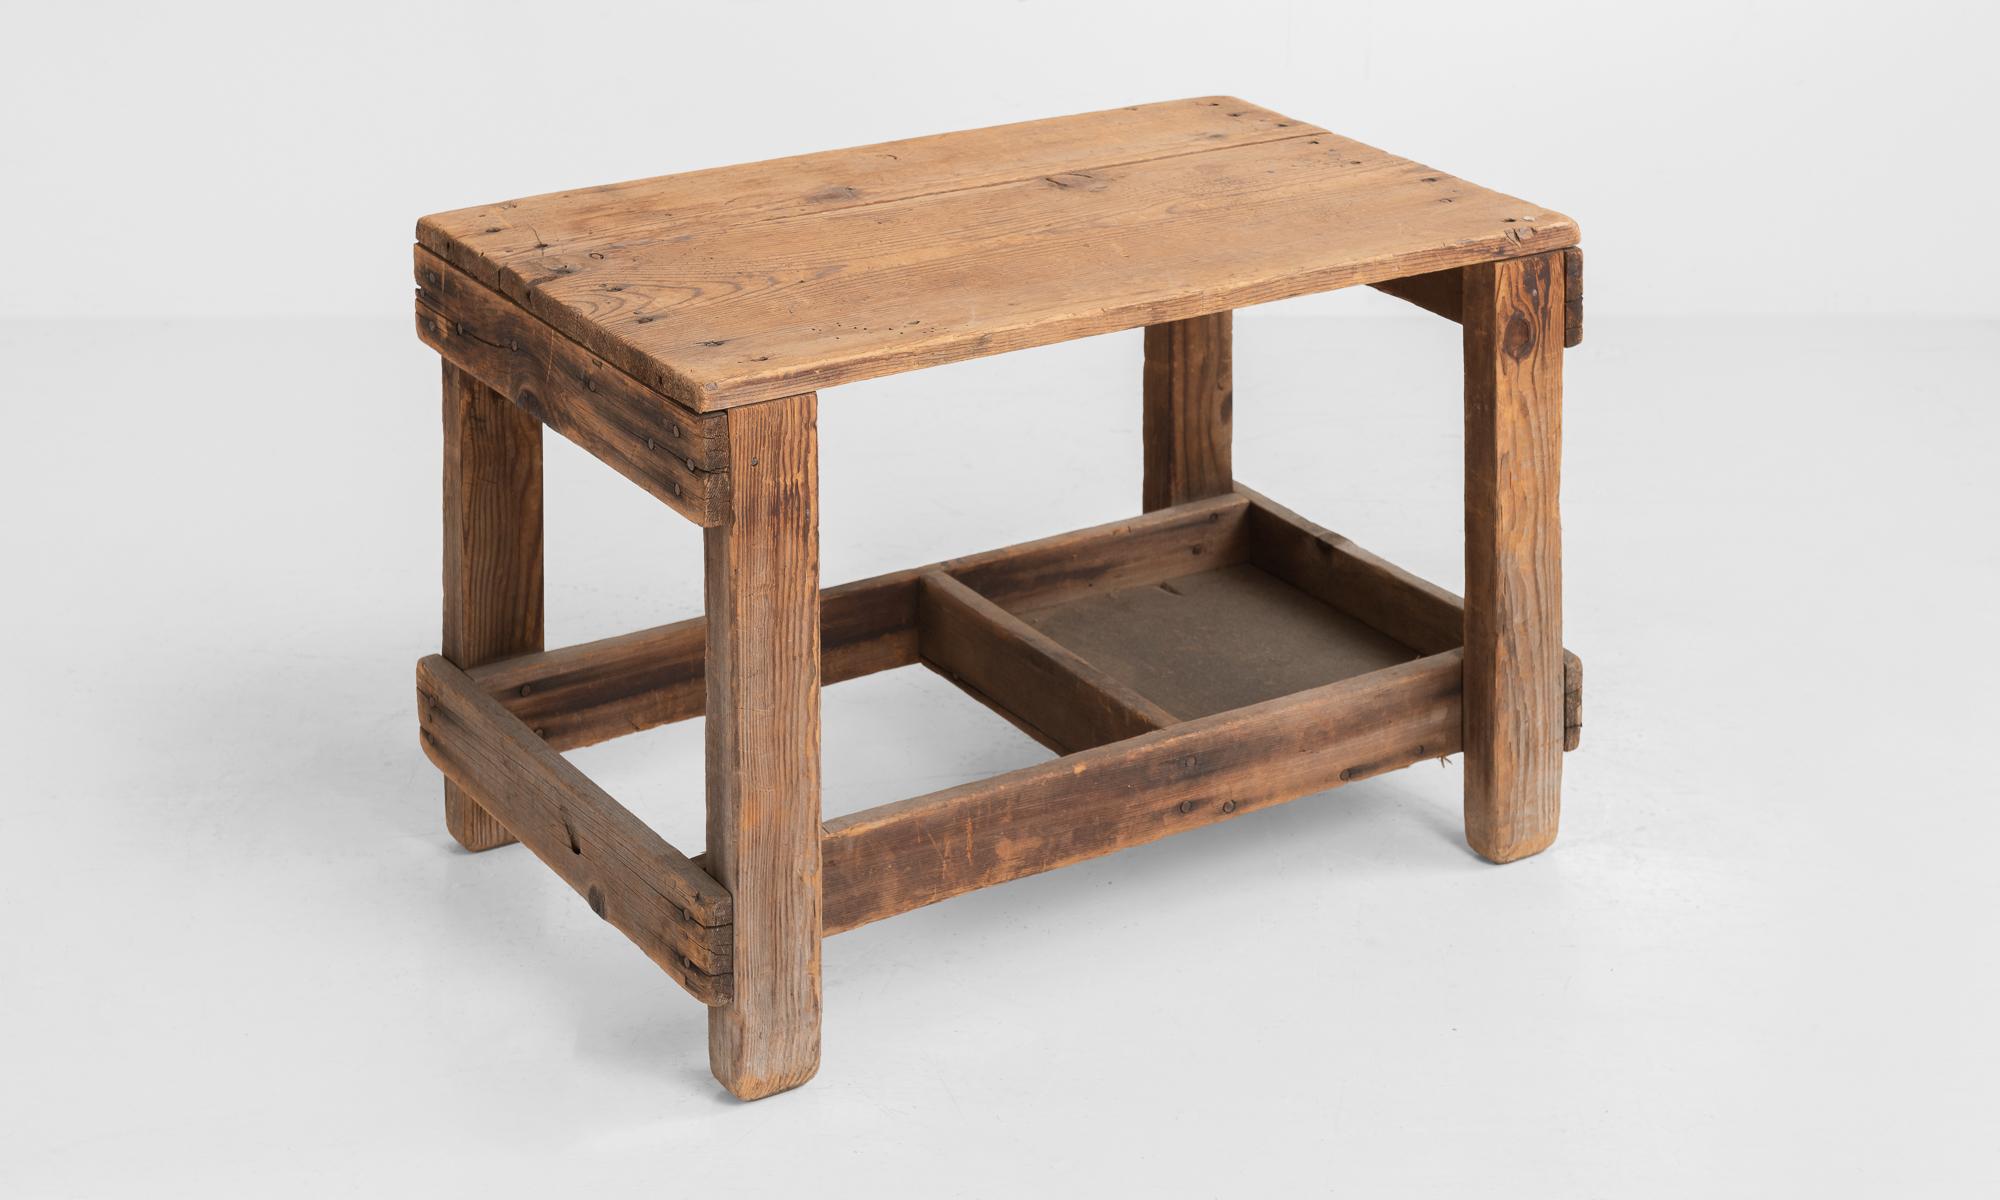 Primitive coffee table, America, circa 1930

Small work table with utilitarian construction and lower shelf.